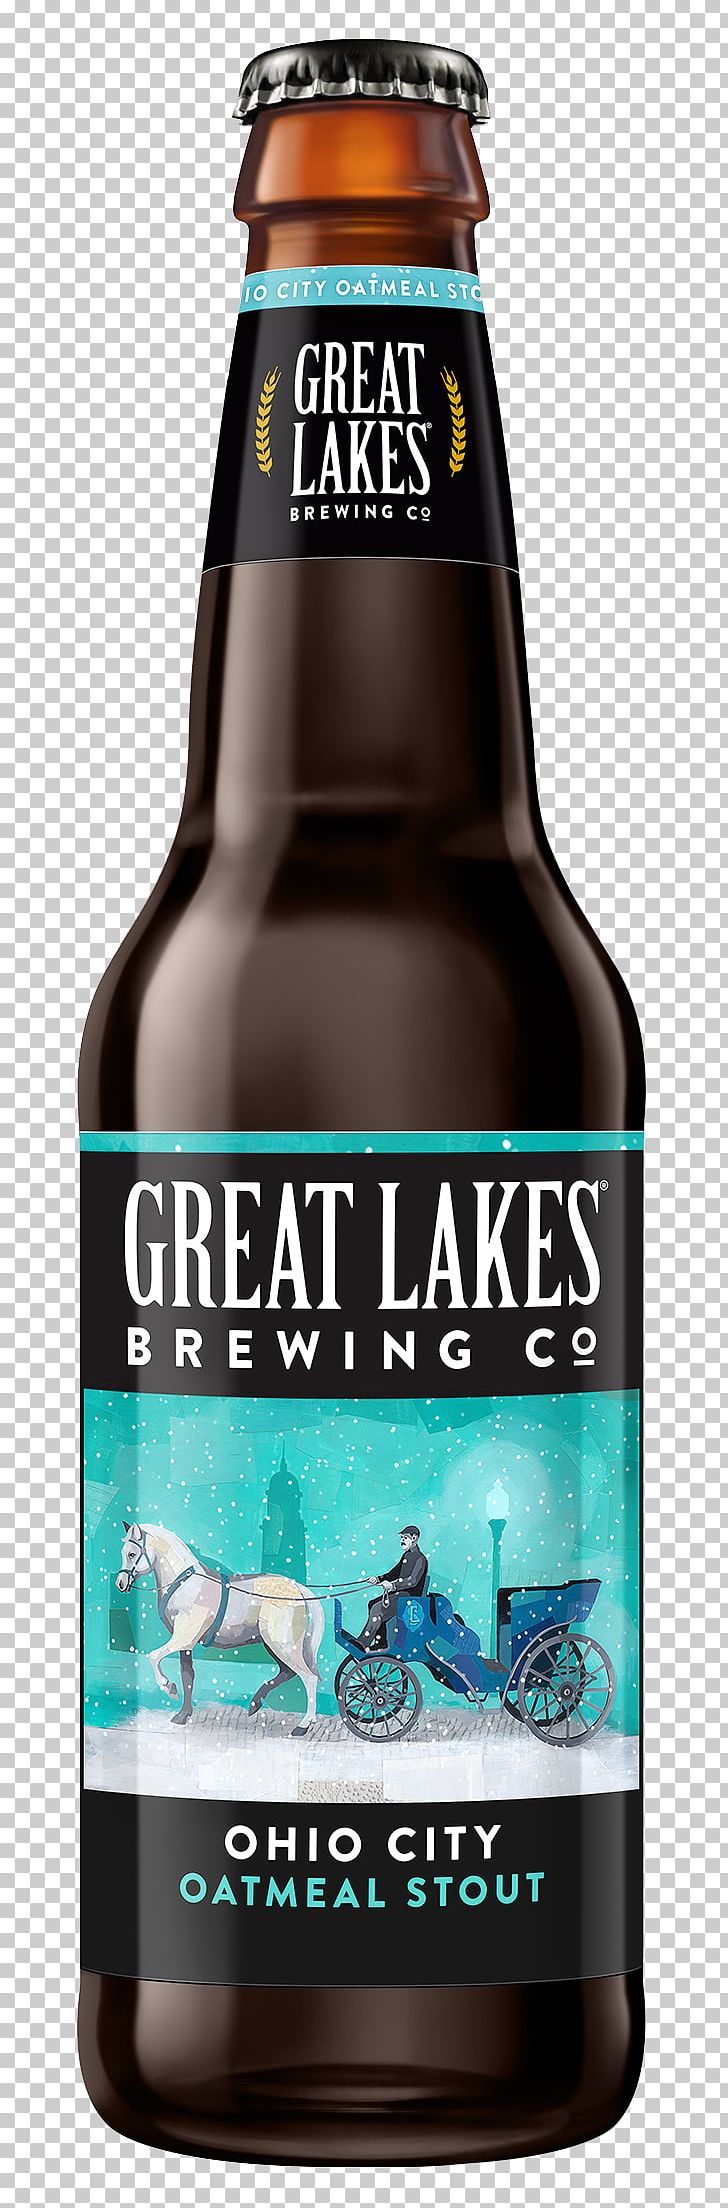 Great Lakes Brewing Company Beer Ale Stout Ohio City PNG, Clipart, Alcoholic Beverage, Ale, Beer, Beer Bottle, Beer Brewing Grains Malts Free PNG Download